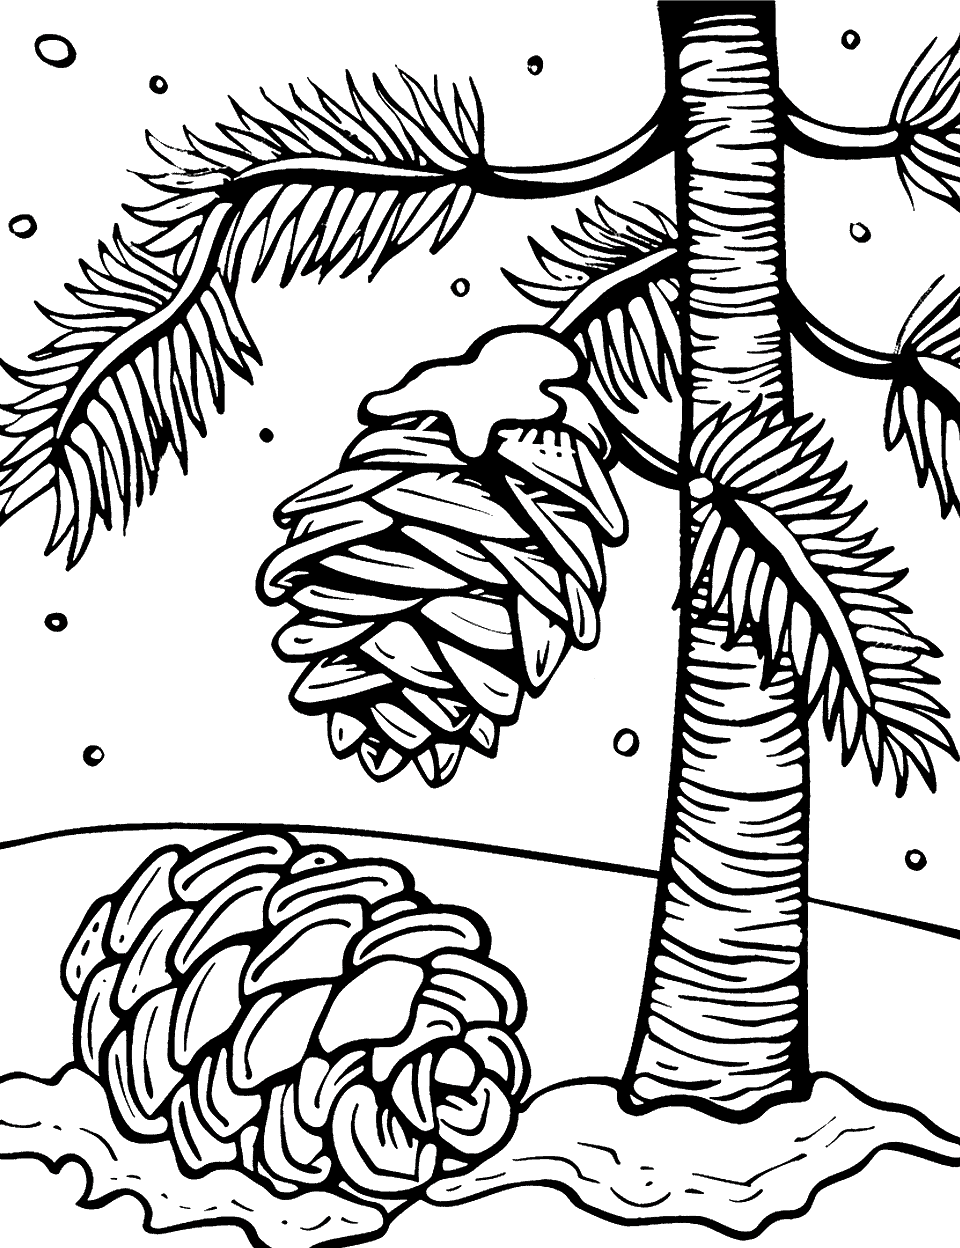 Winter Pine Cone Collection Coloring Page - Pine cones lying in the snow under a pine tree.